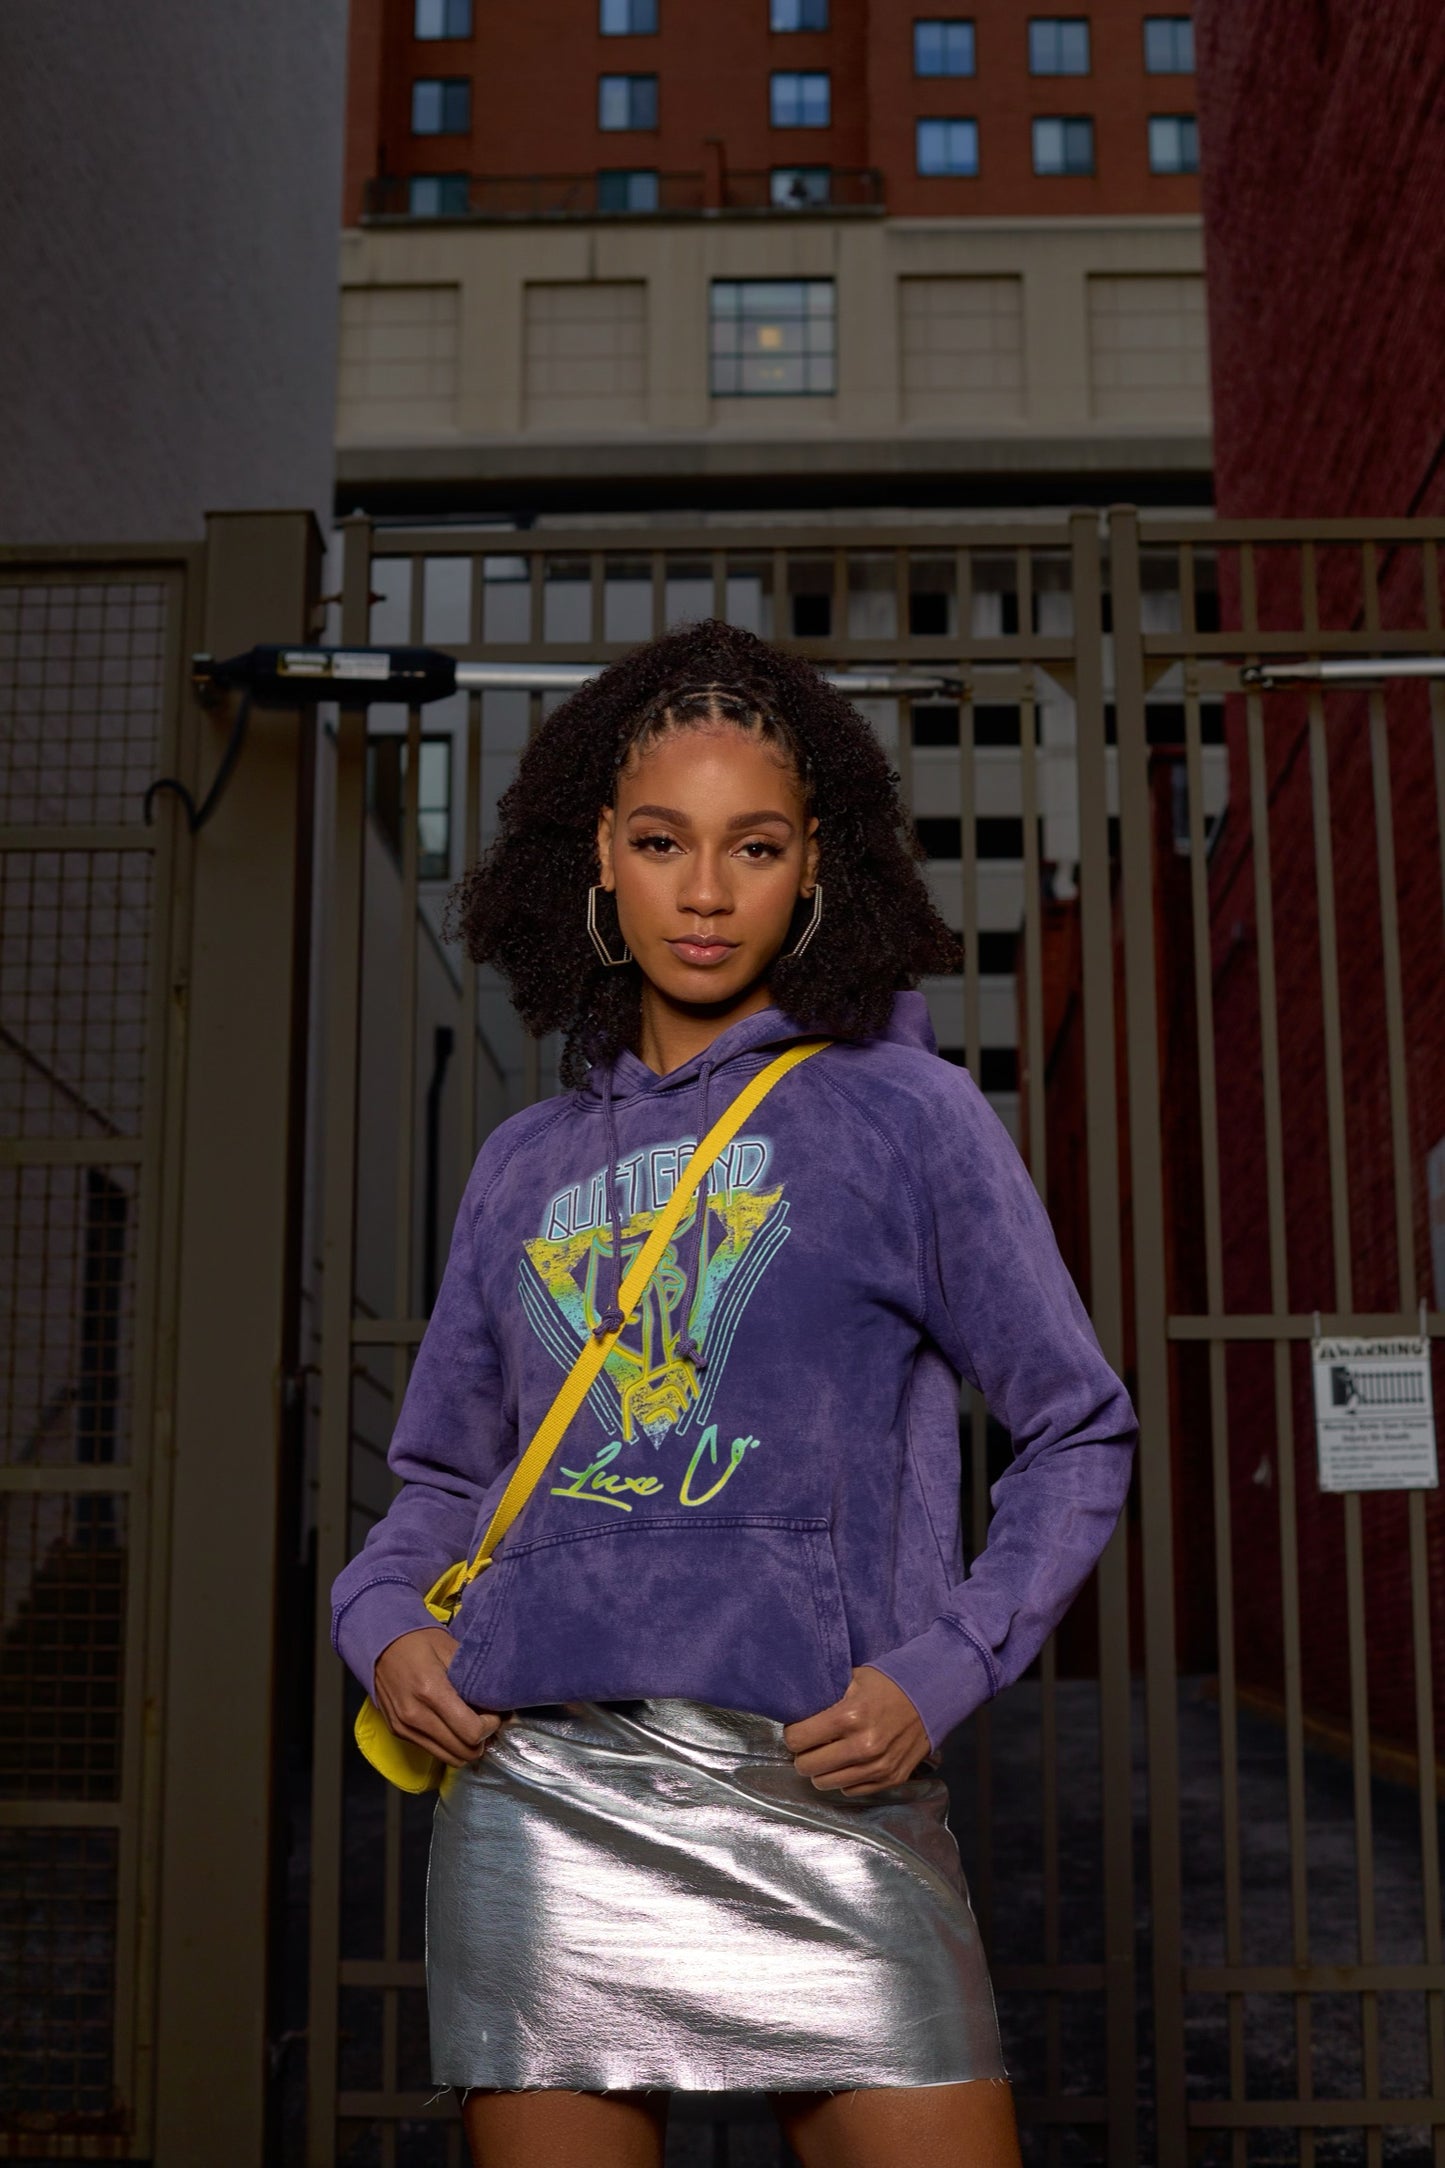 Violet Band Graphic Hoodie